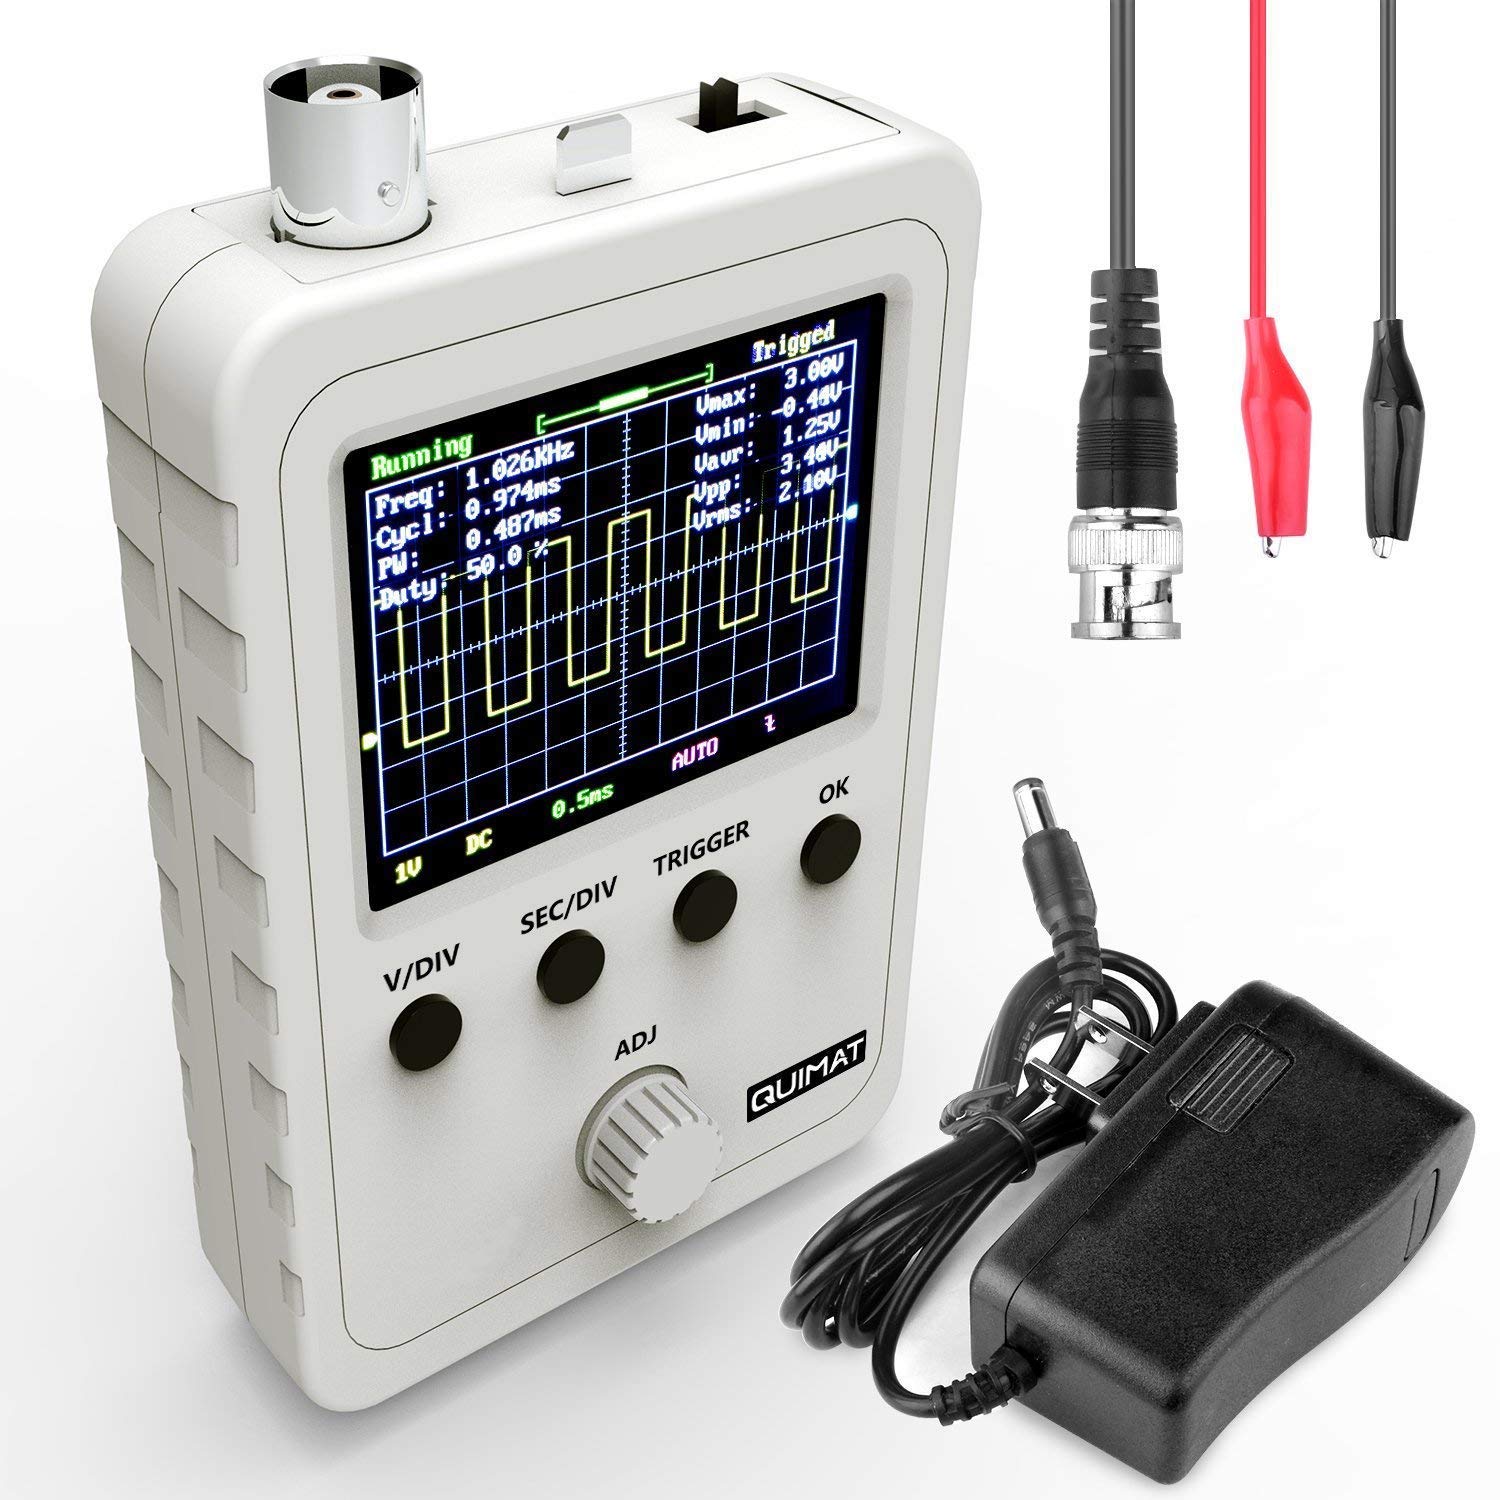 Which Oscilloscope is for Audio?